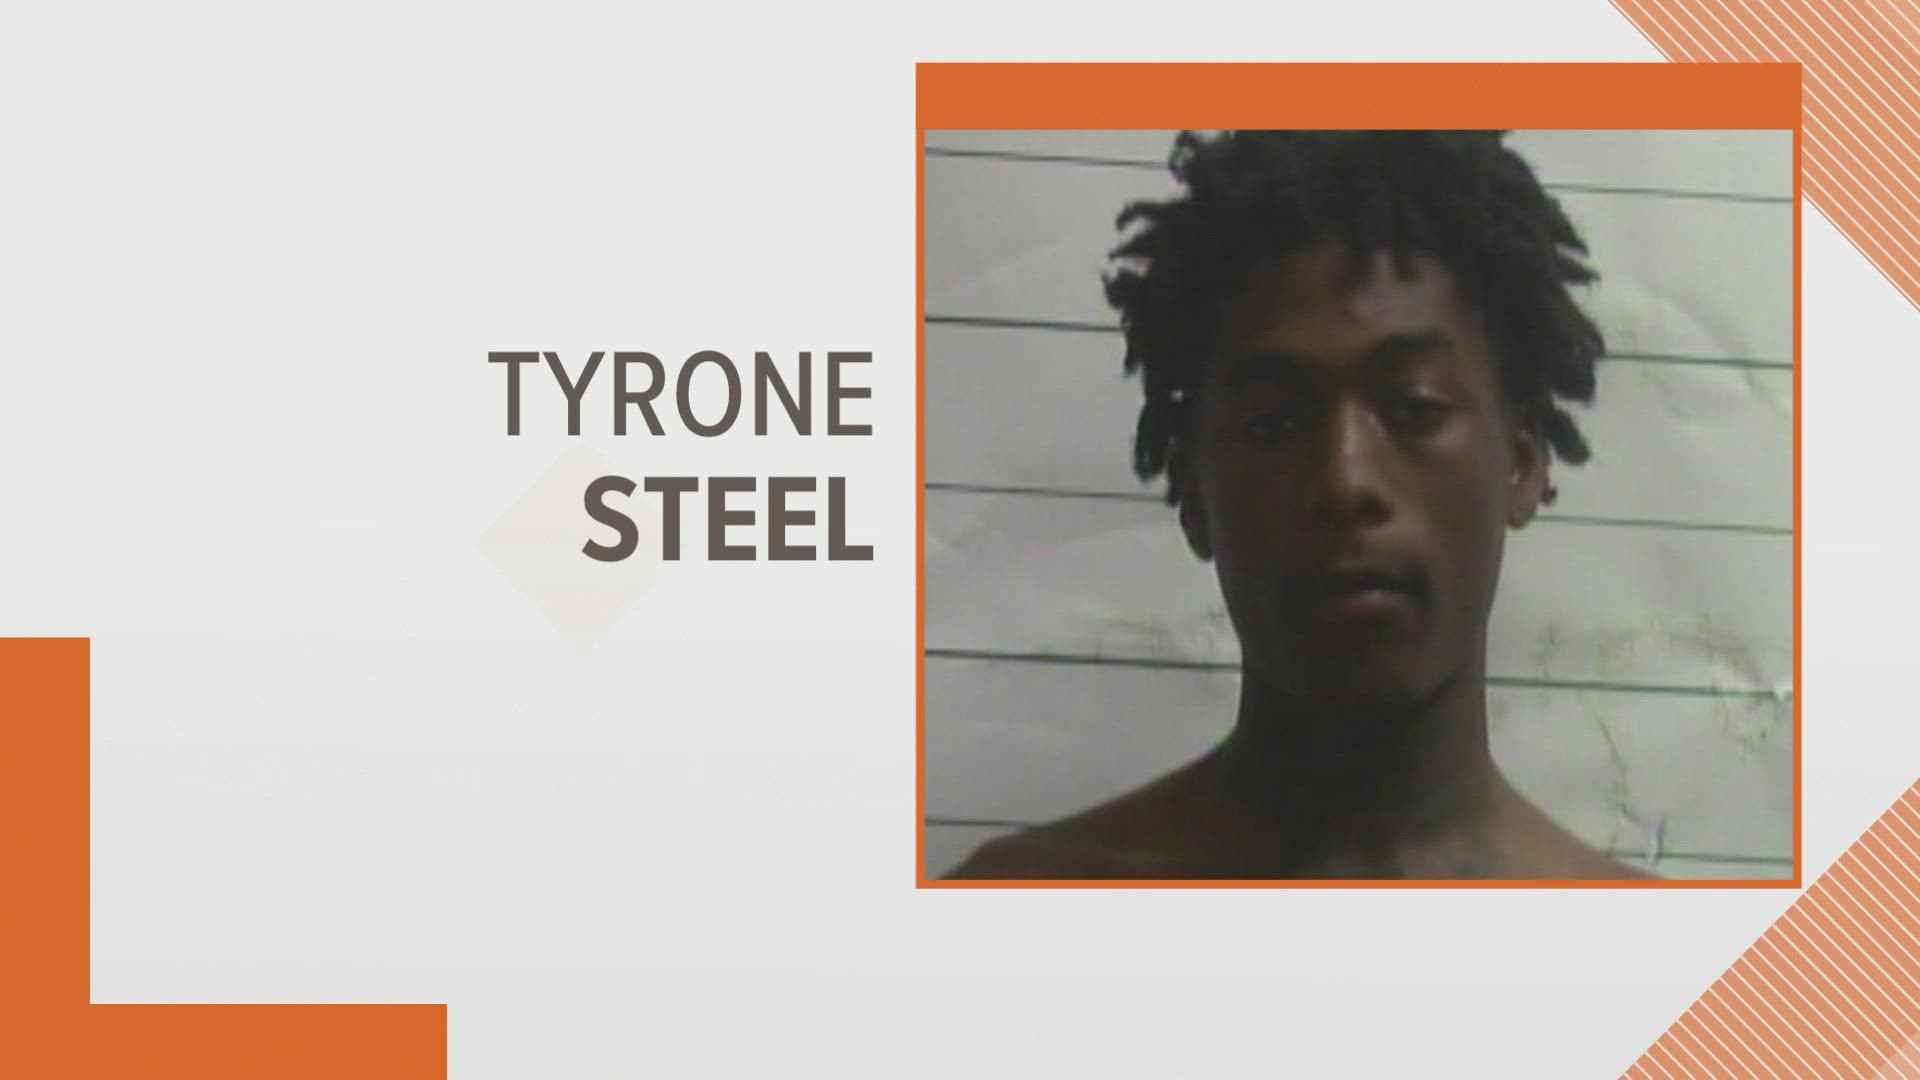 18-year-old Tyron Steel was arrested last week for the triple homicide on Encampment Street last month